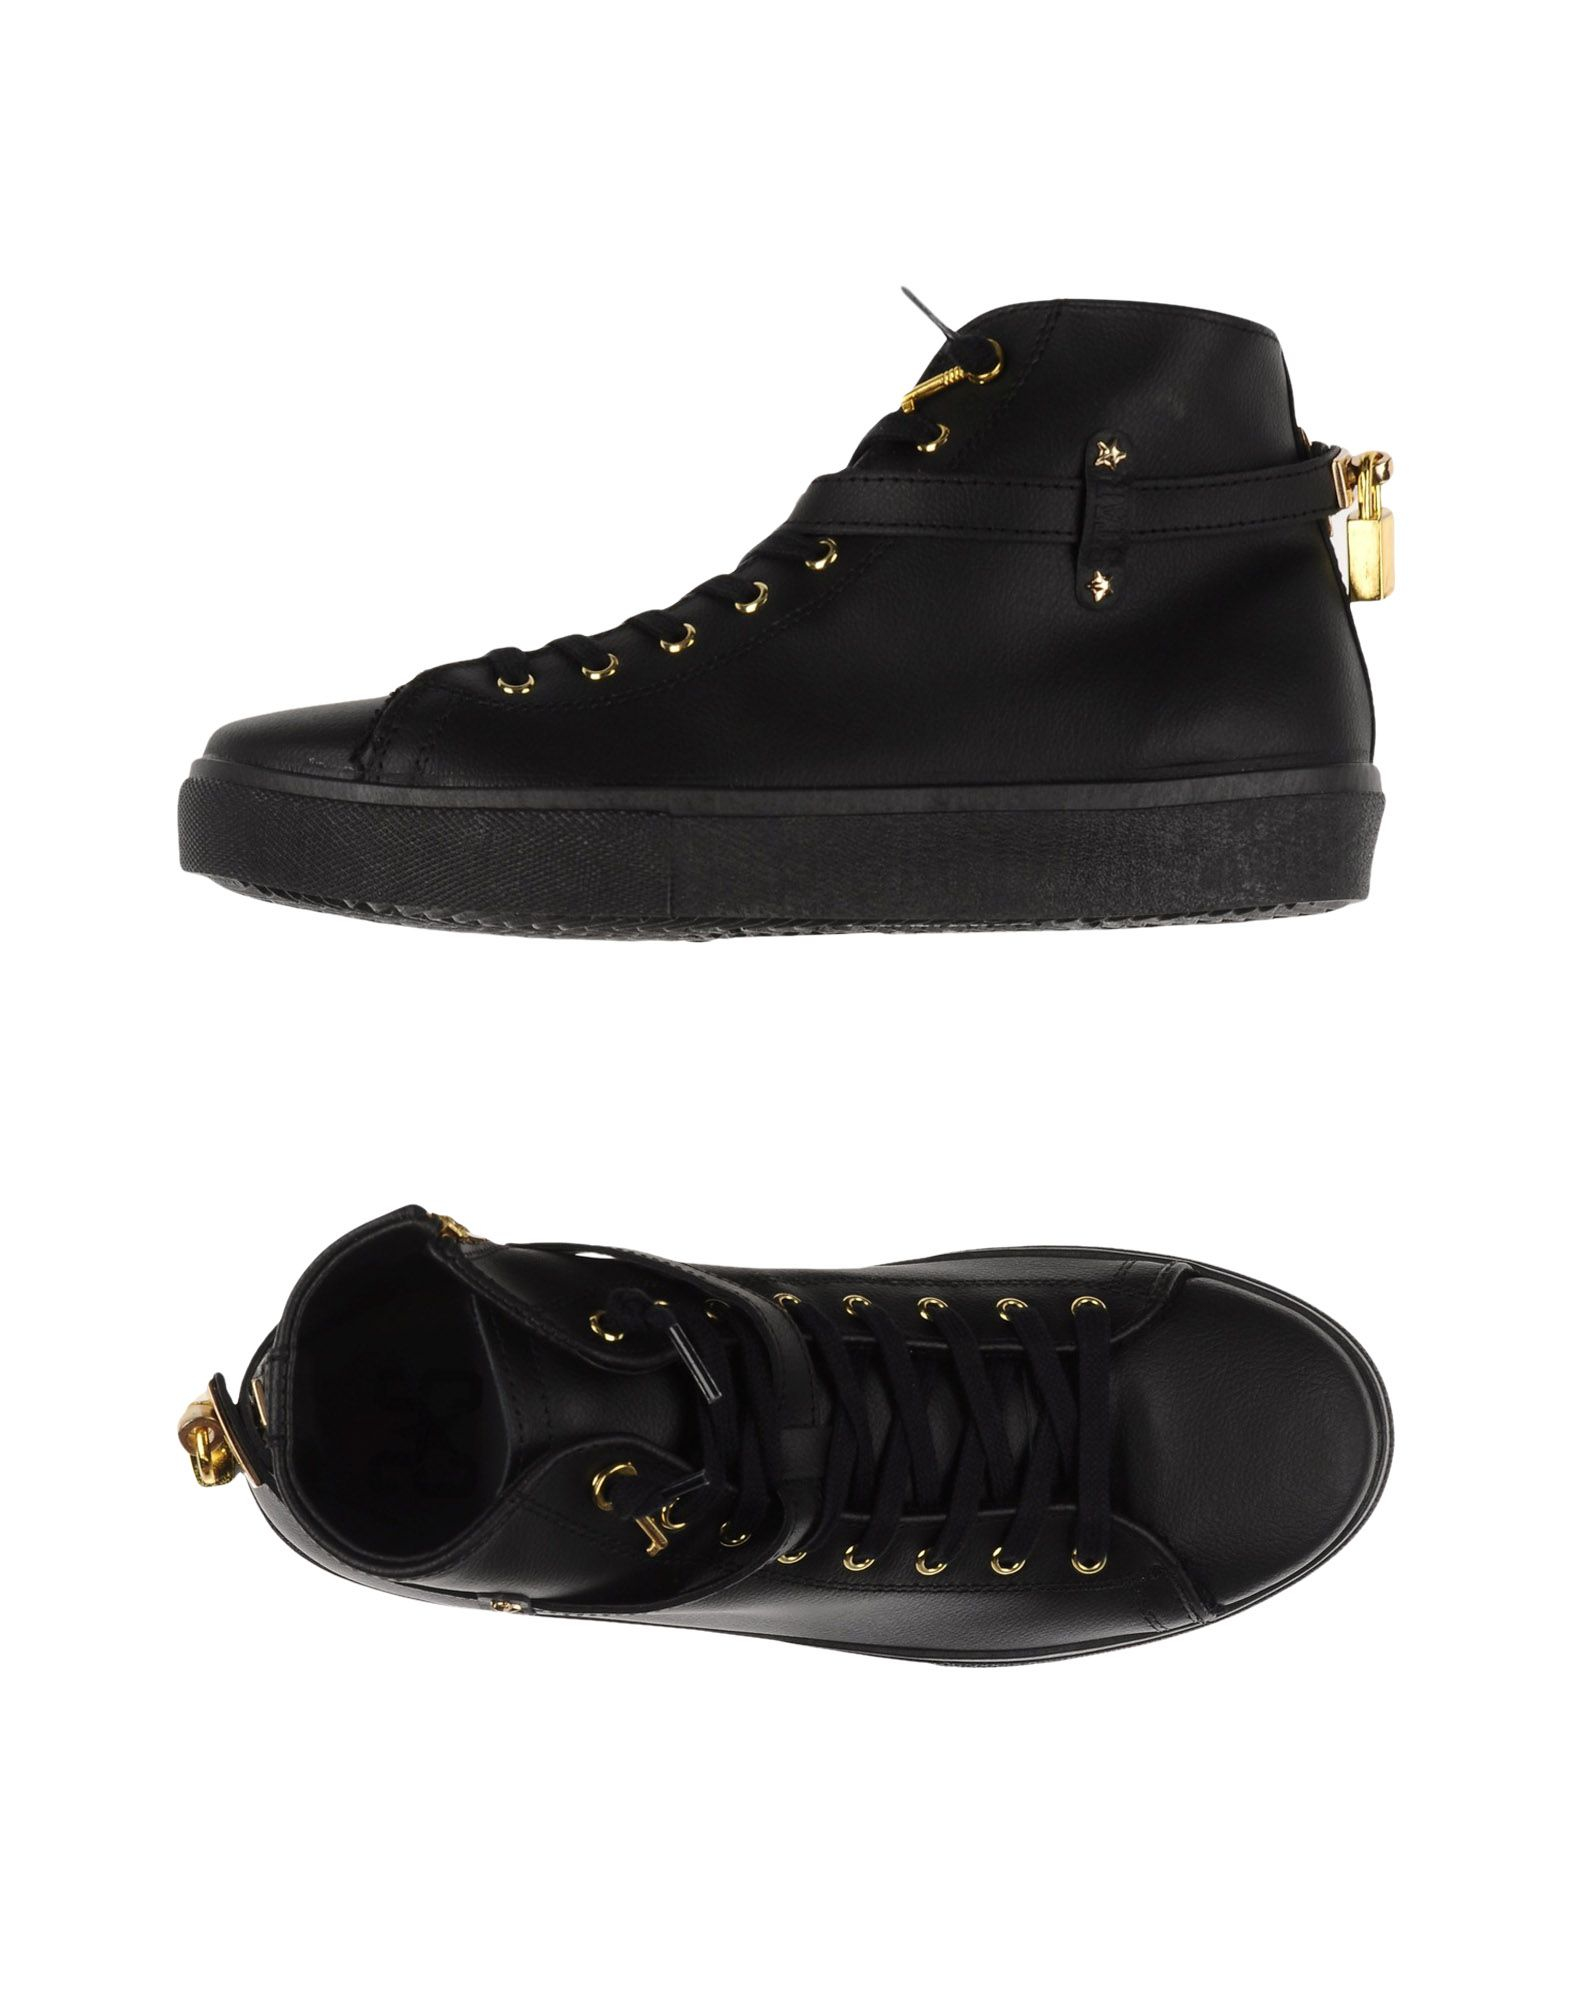 2star High-tops & Trainers in Black | Lyst